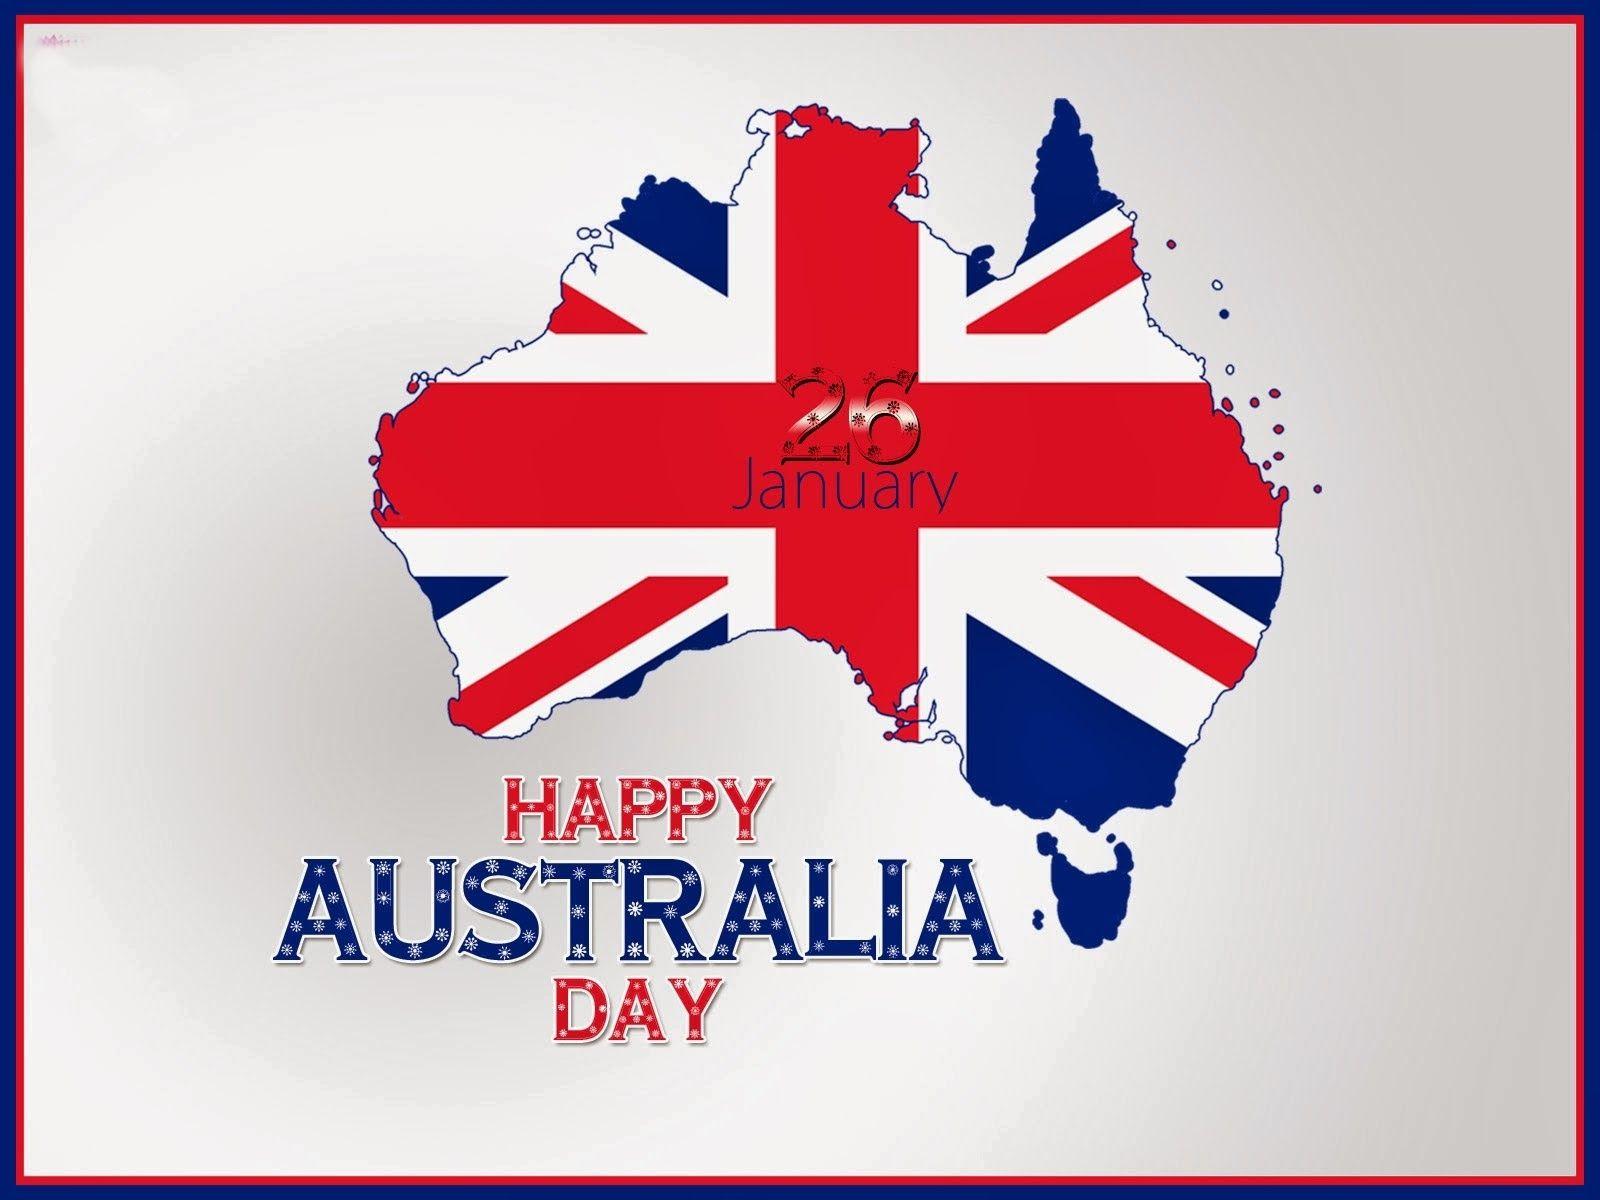 Happy Australia Day Quotes & Messages with Greeting Image